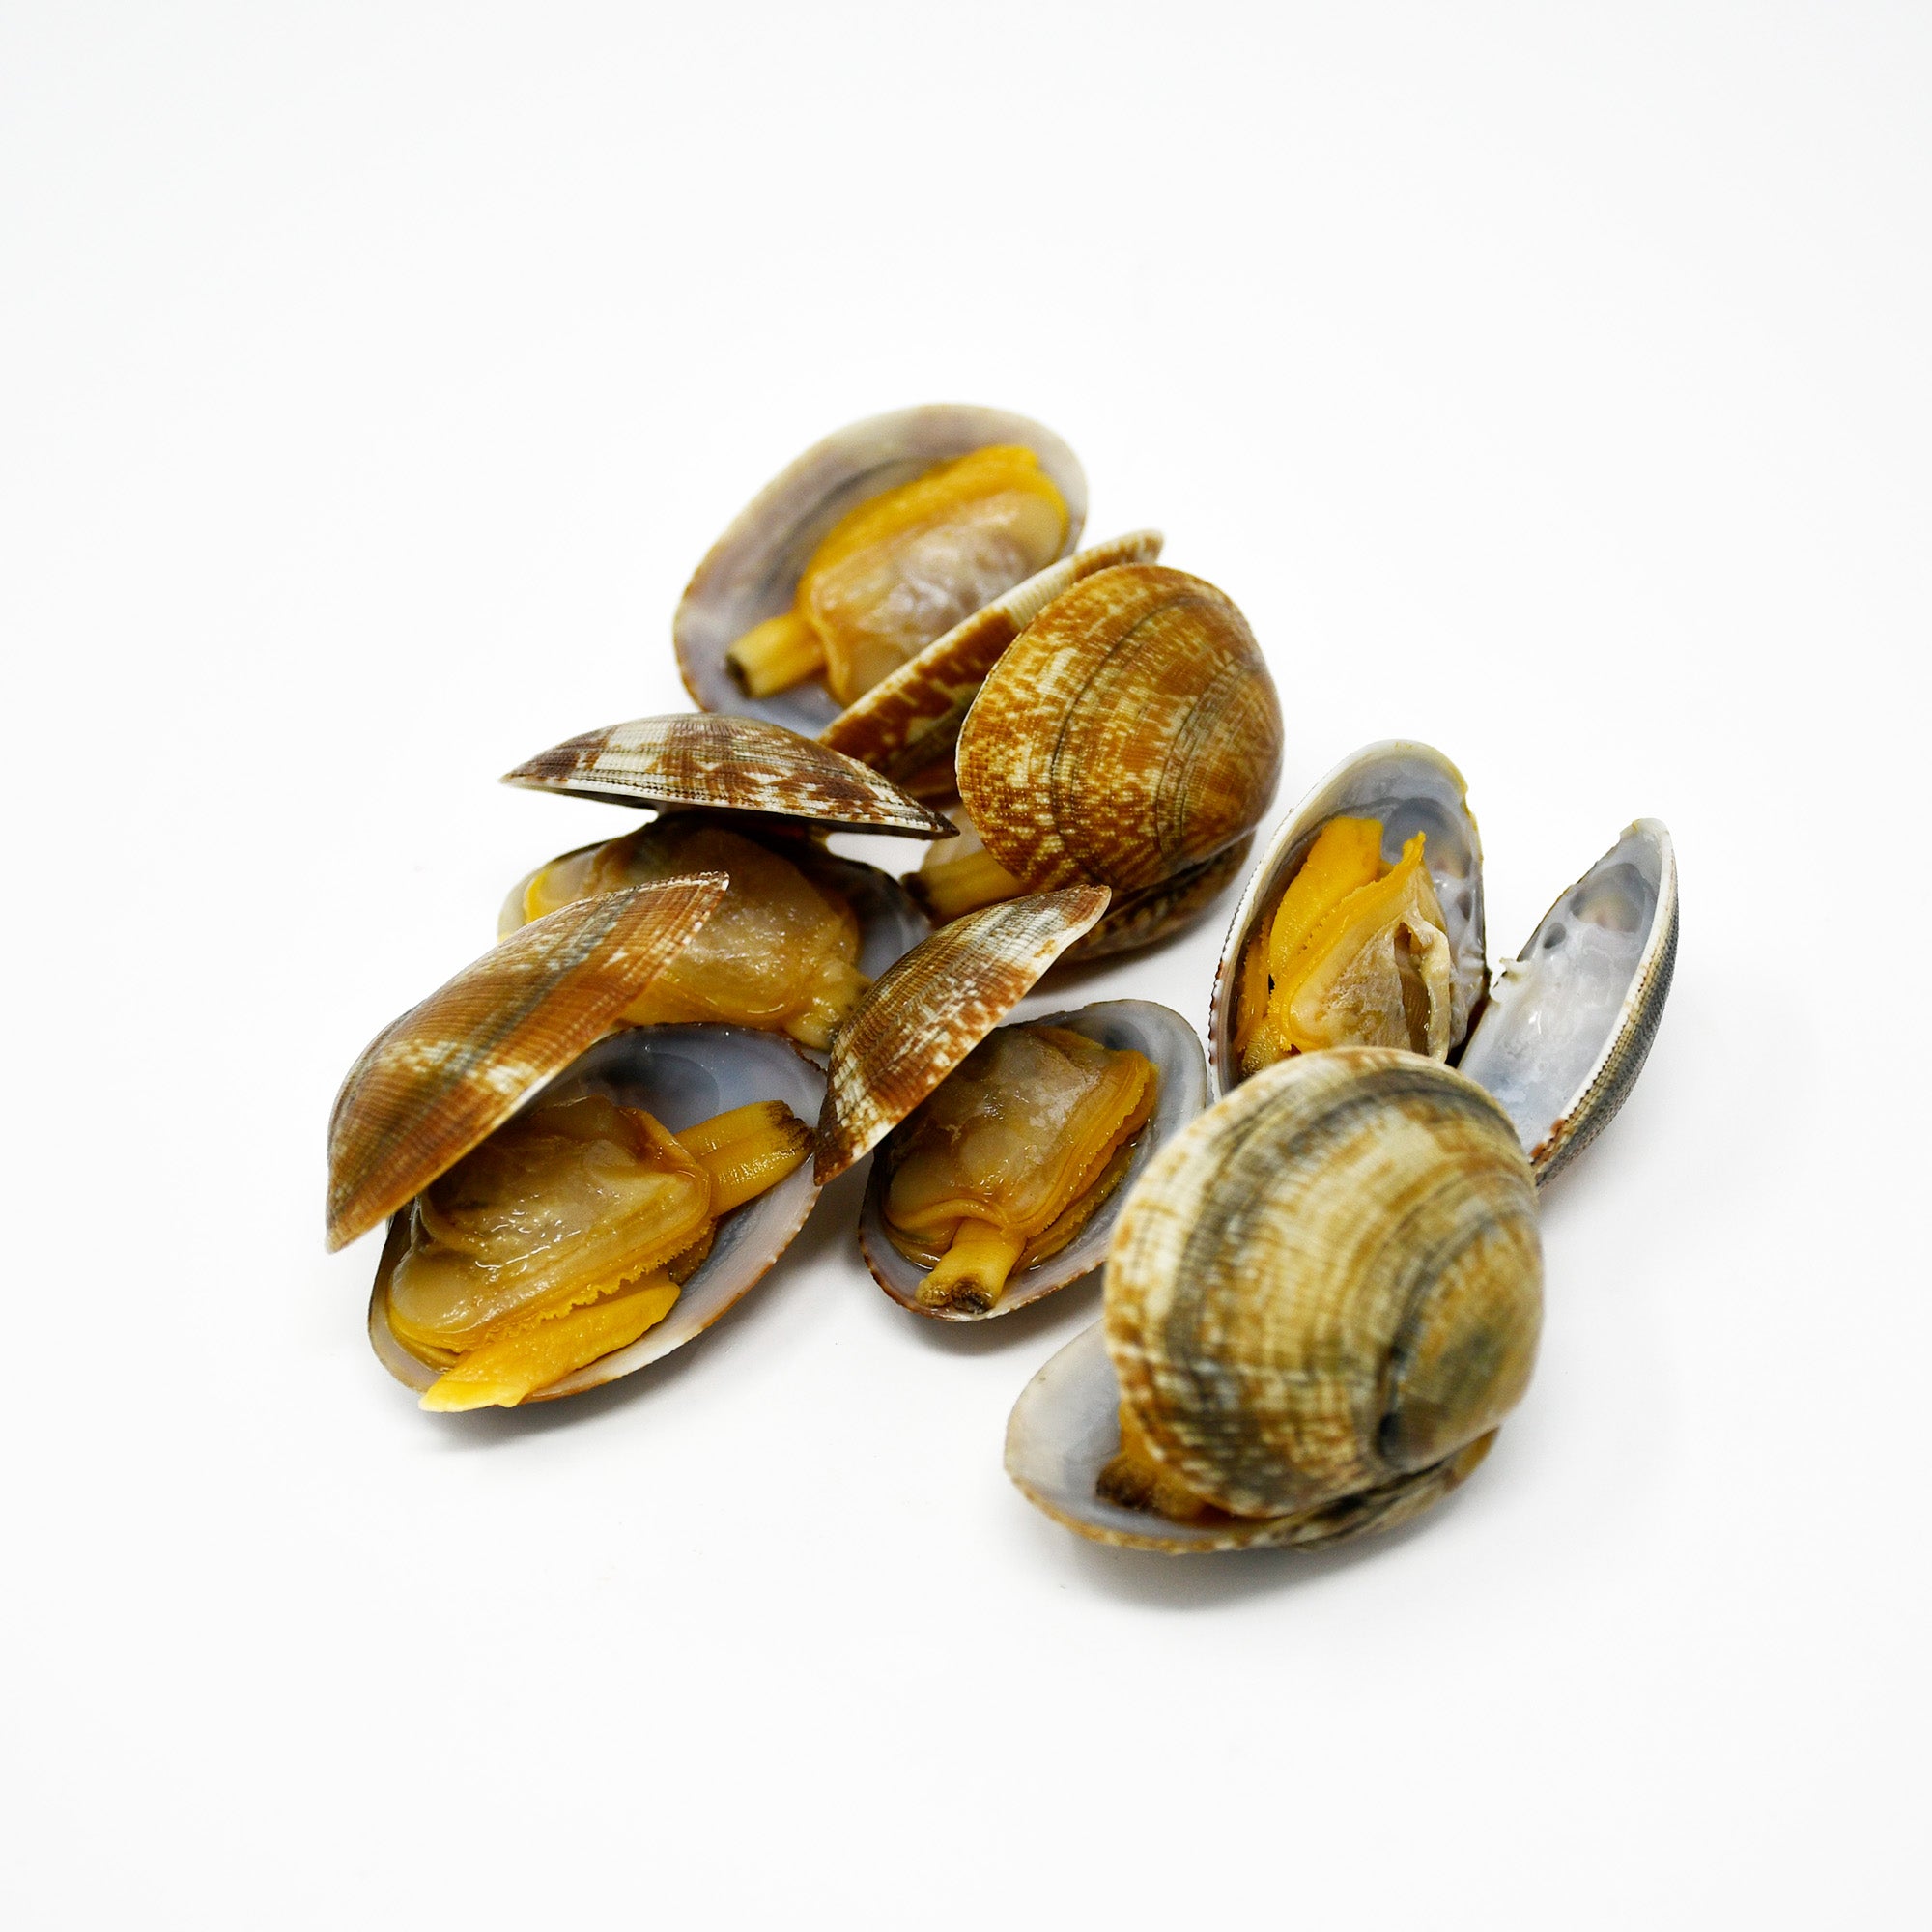 COOKED & FROZEN SHORT NECK CLAMS WITH SHELL (500g)